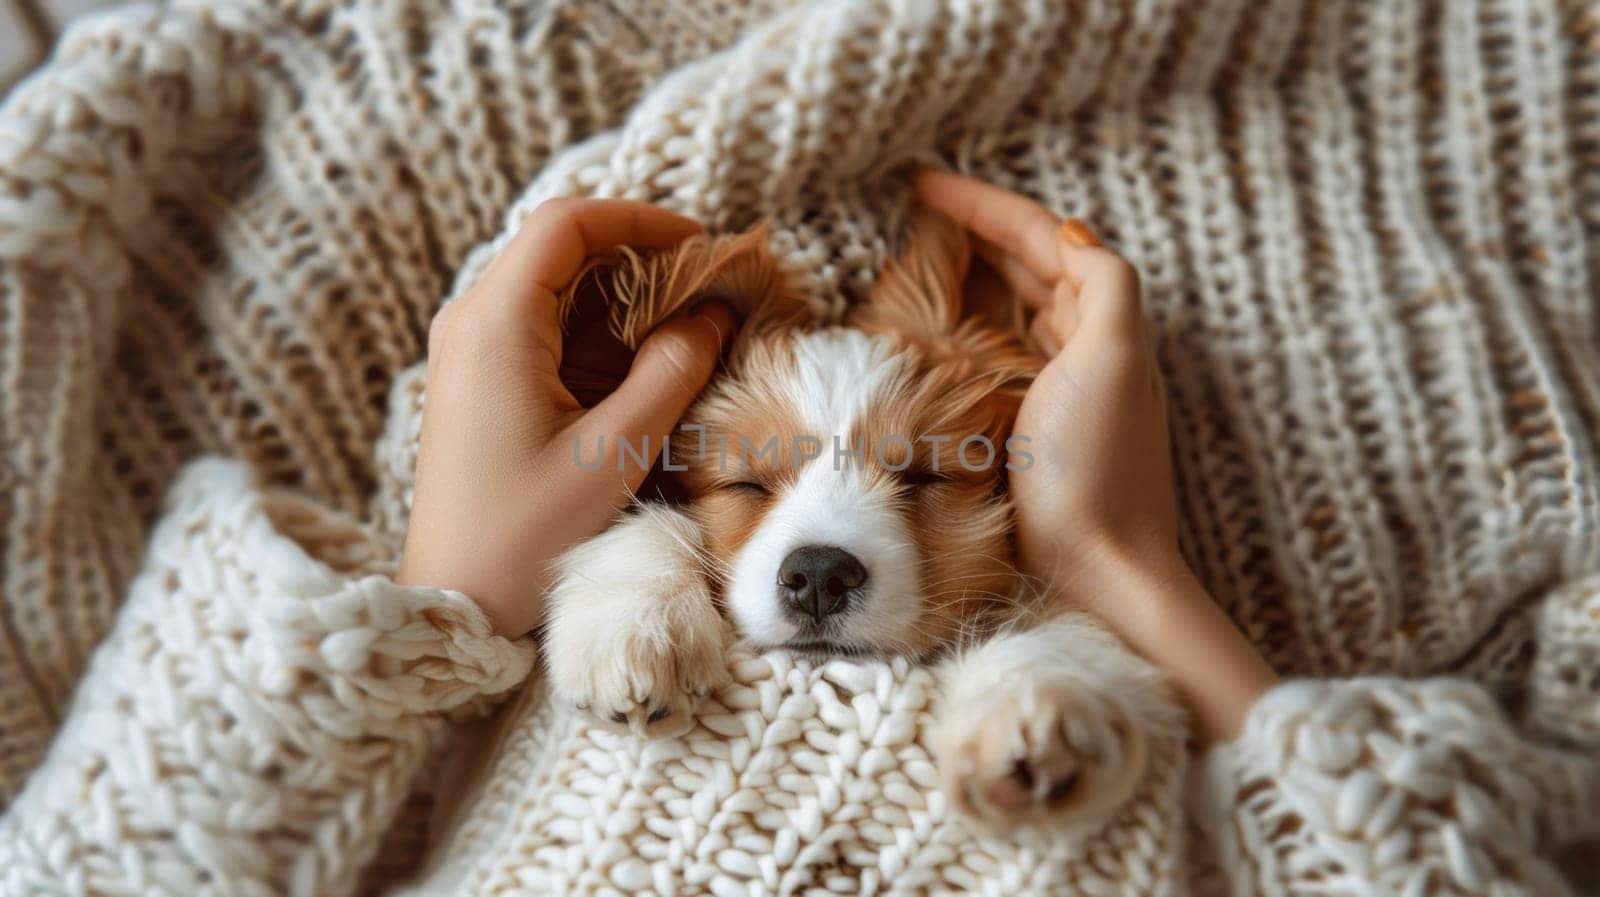 A person holding a small dog in their hands while they are wrapped up, AI by starush